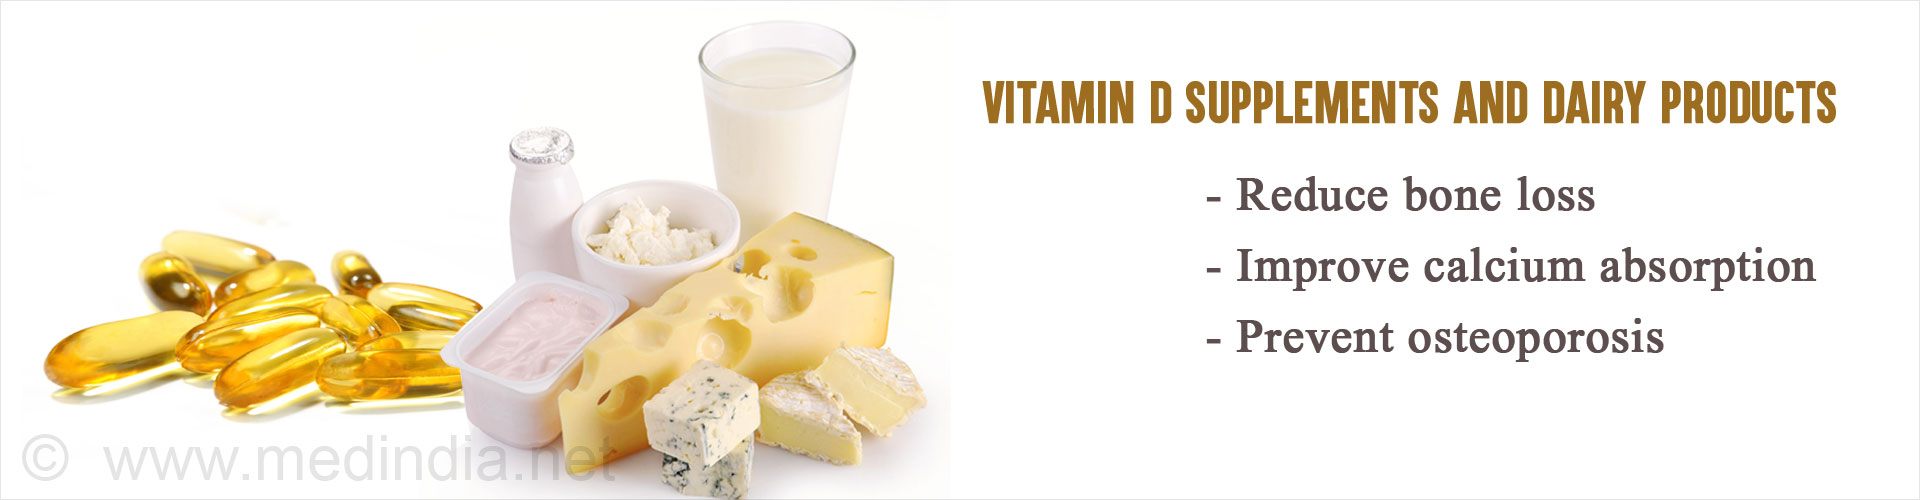 Vitamin D supplements and dairy products
- Reduce bone loss
- Improve calcium absorption
- Prevent osteoporosis
